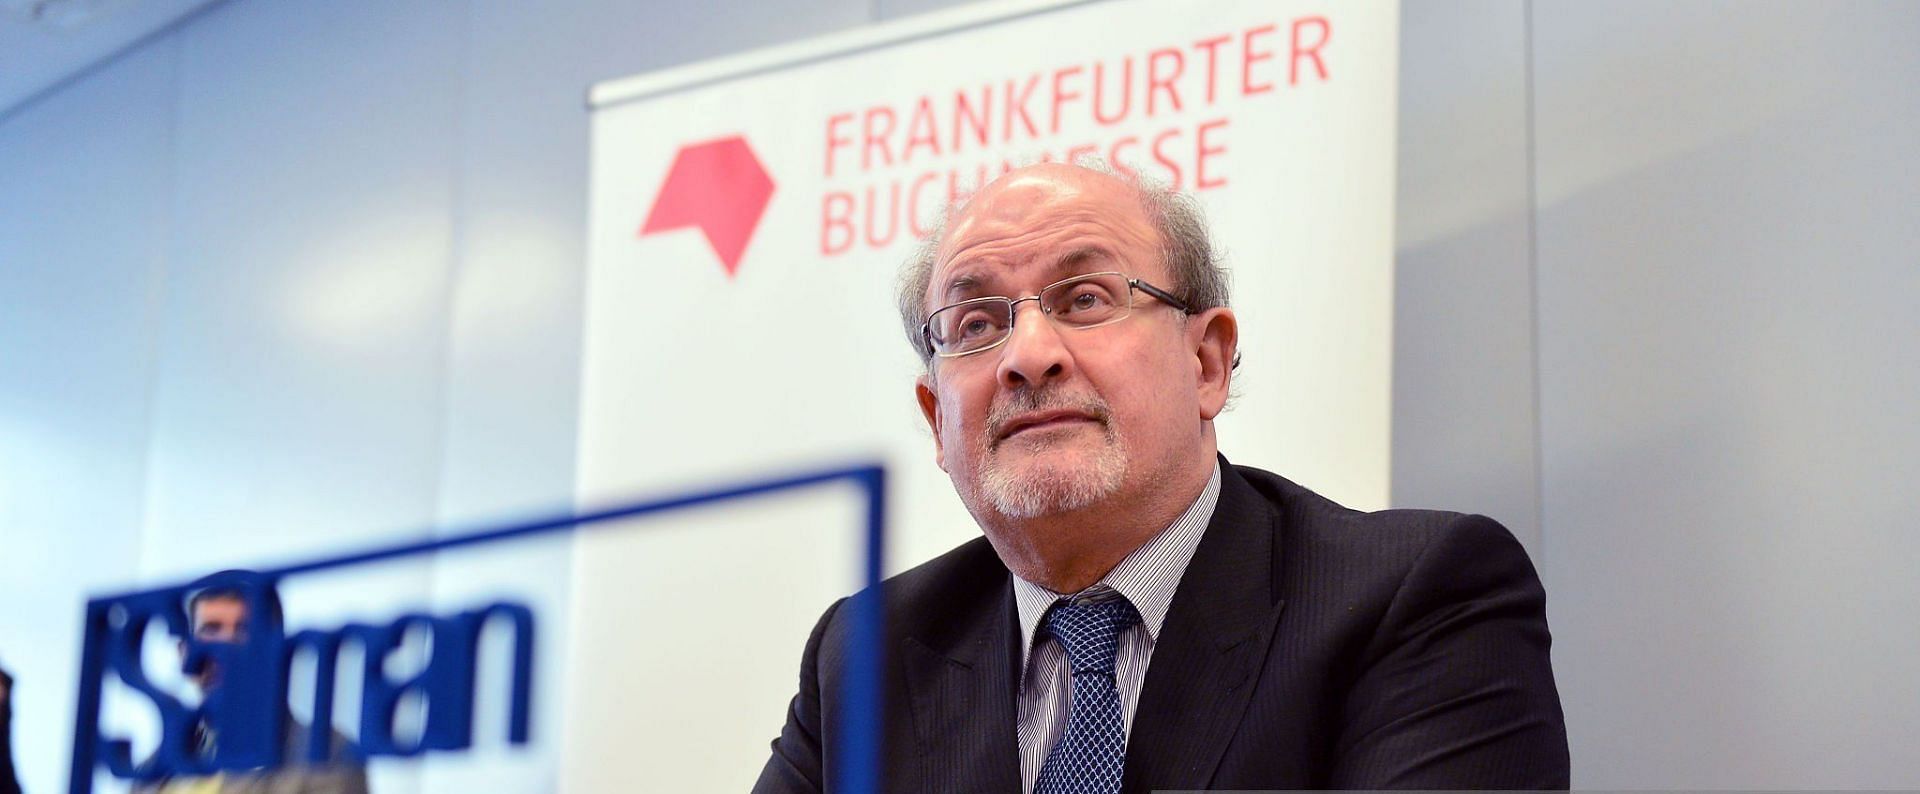 Prominent world leaders and authors called out the brutal stabbing attack against Salman Rushdie (Image via Getty Images)